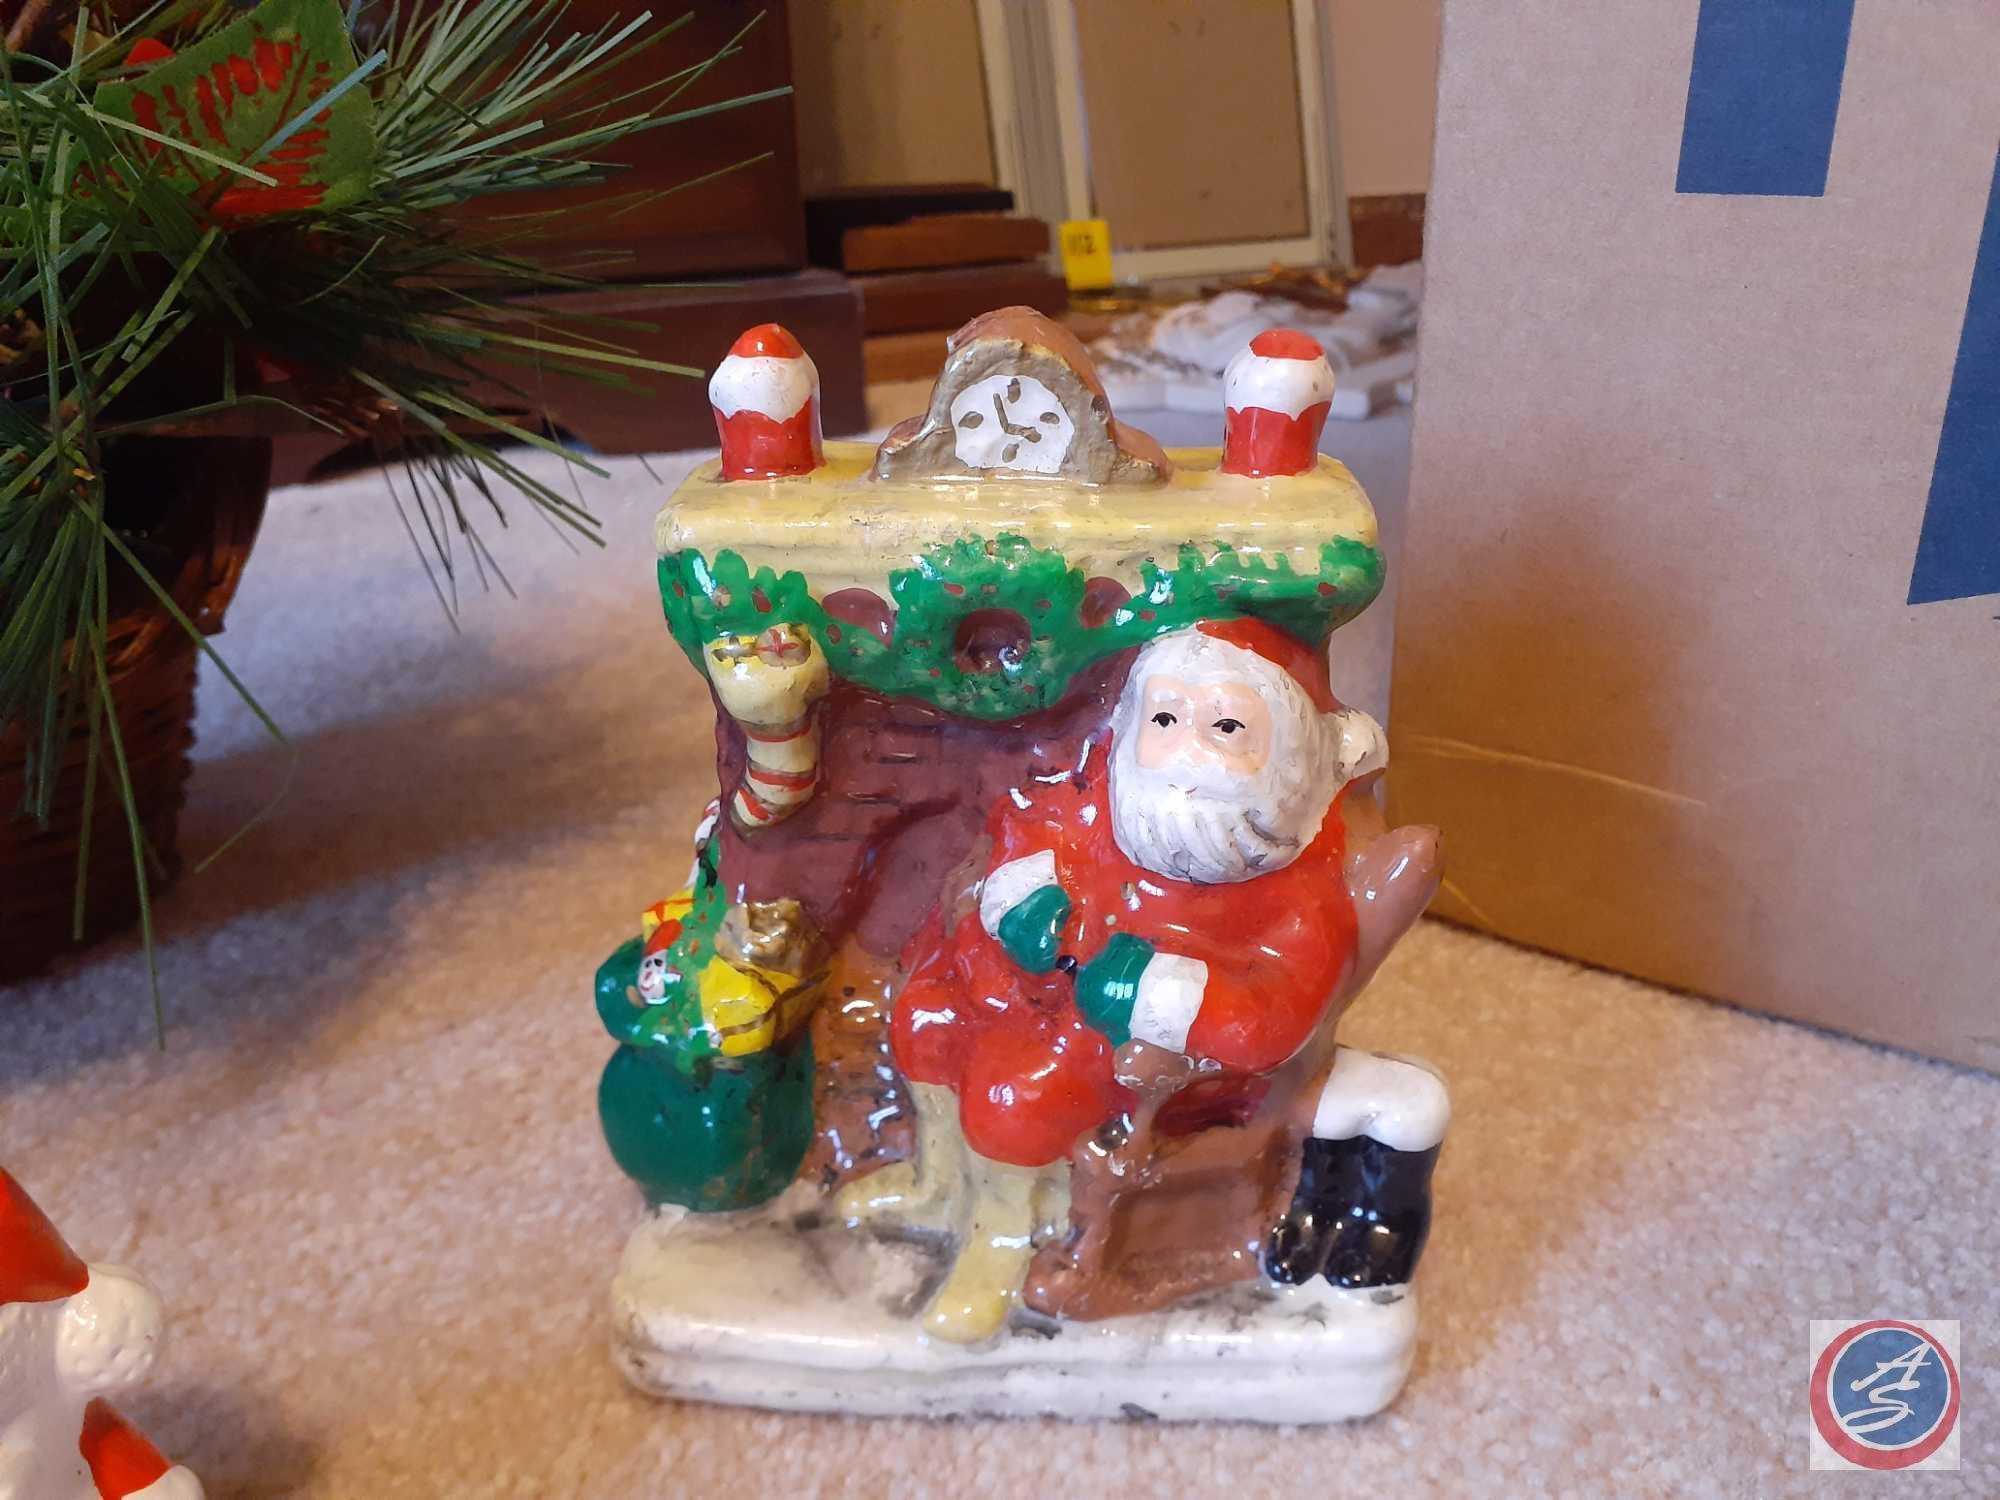 Assorted Holiday Decorations Including Santa's Sleigh, Small Nativity Scene, Santa and Mrs. Claus